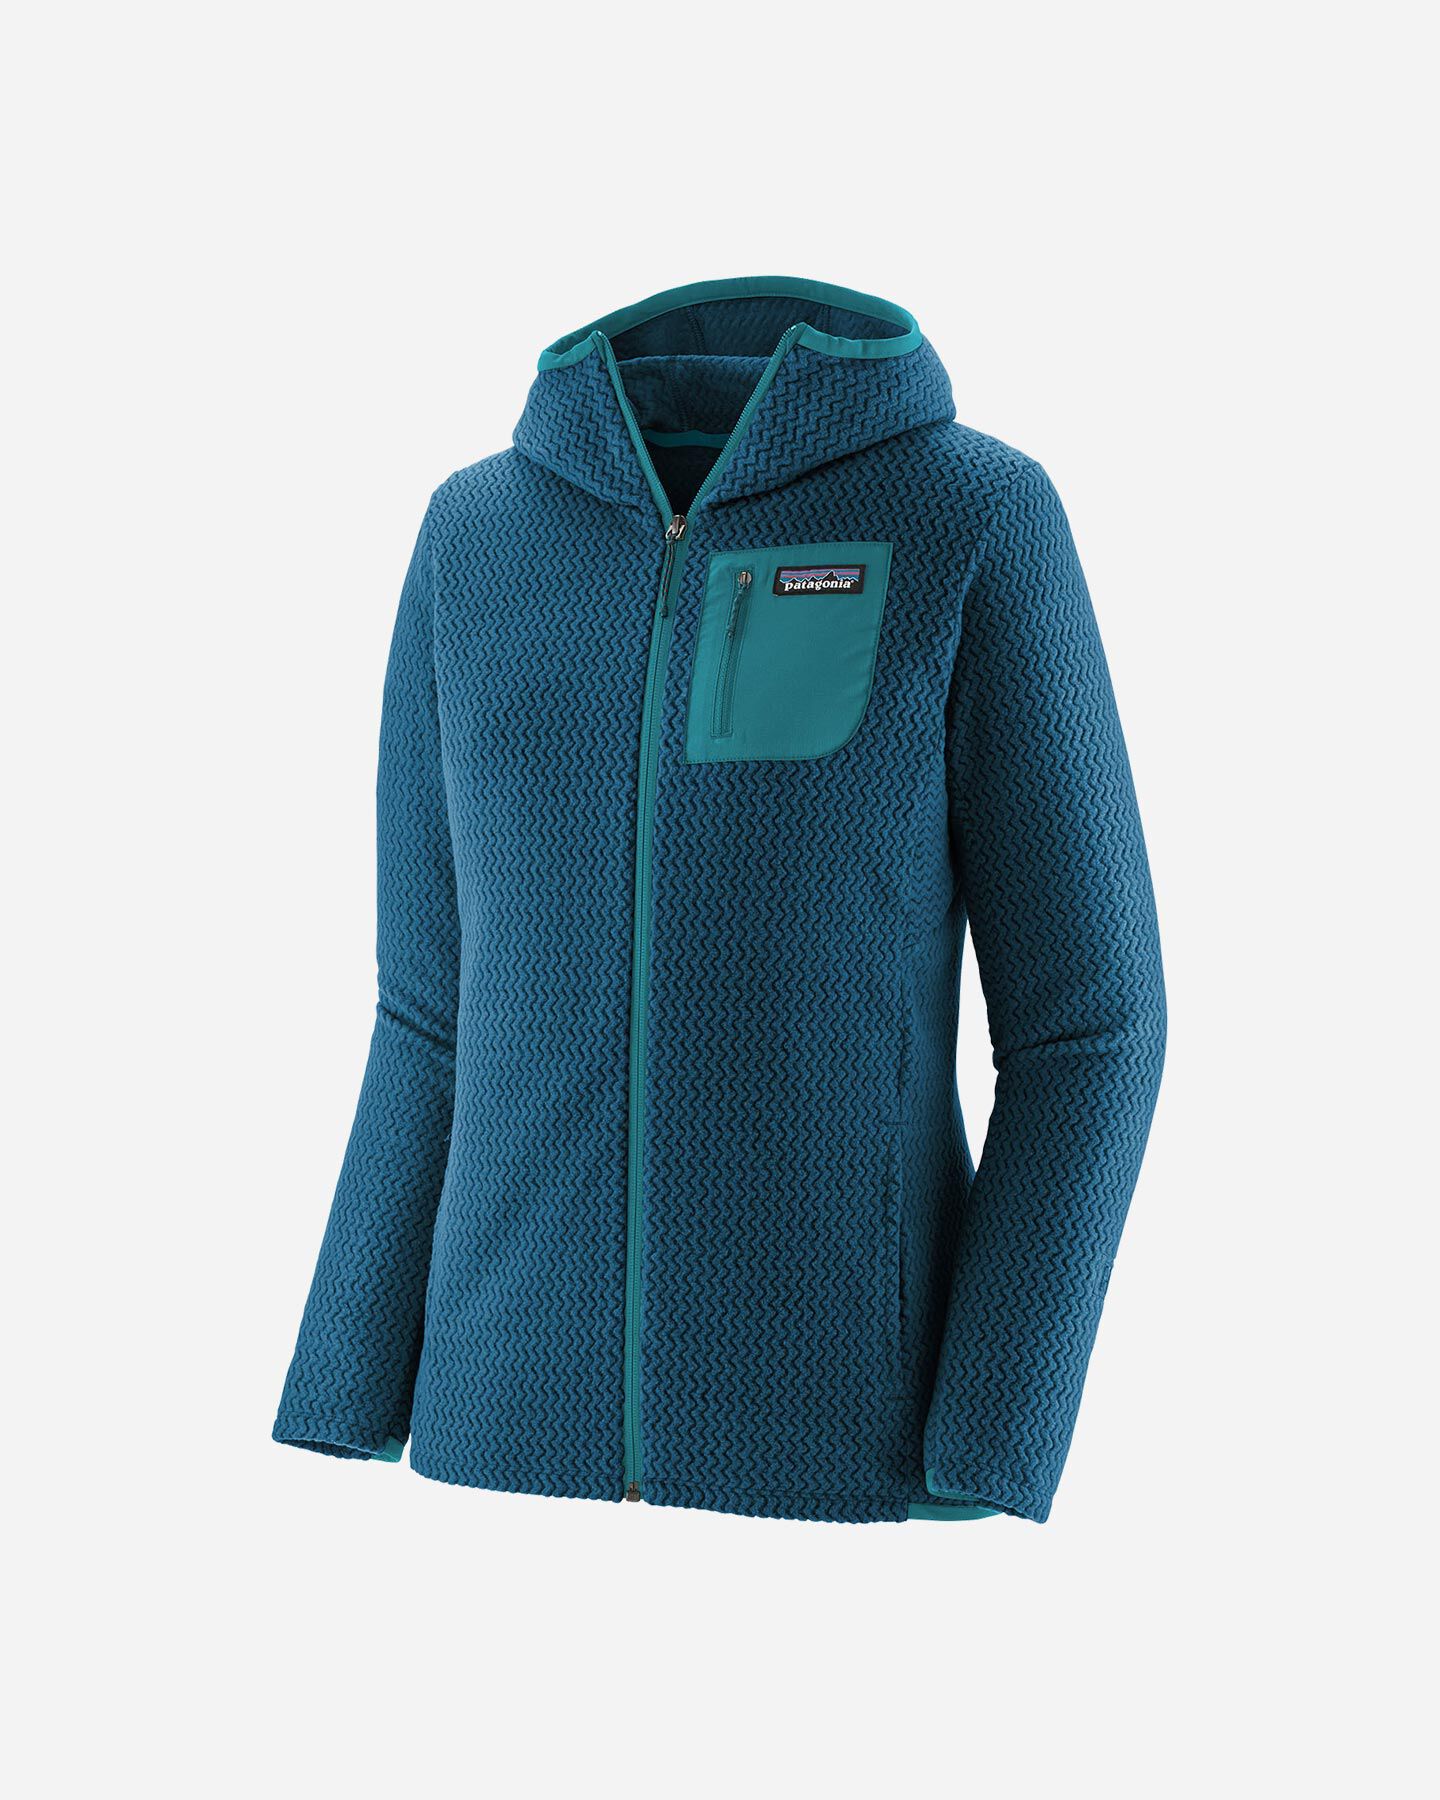  Pile PATAGONIA R1 AIR W S5628792|LMBE|XS scatto 0